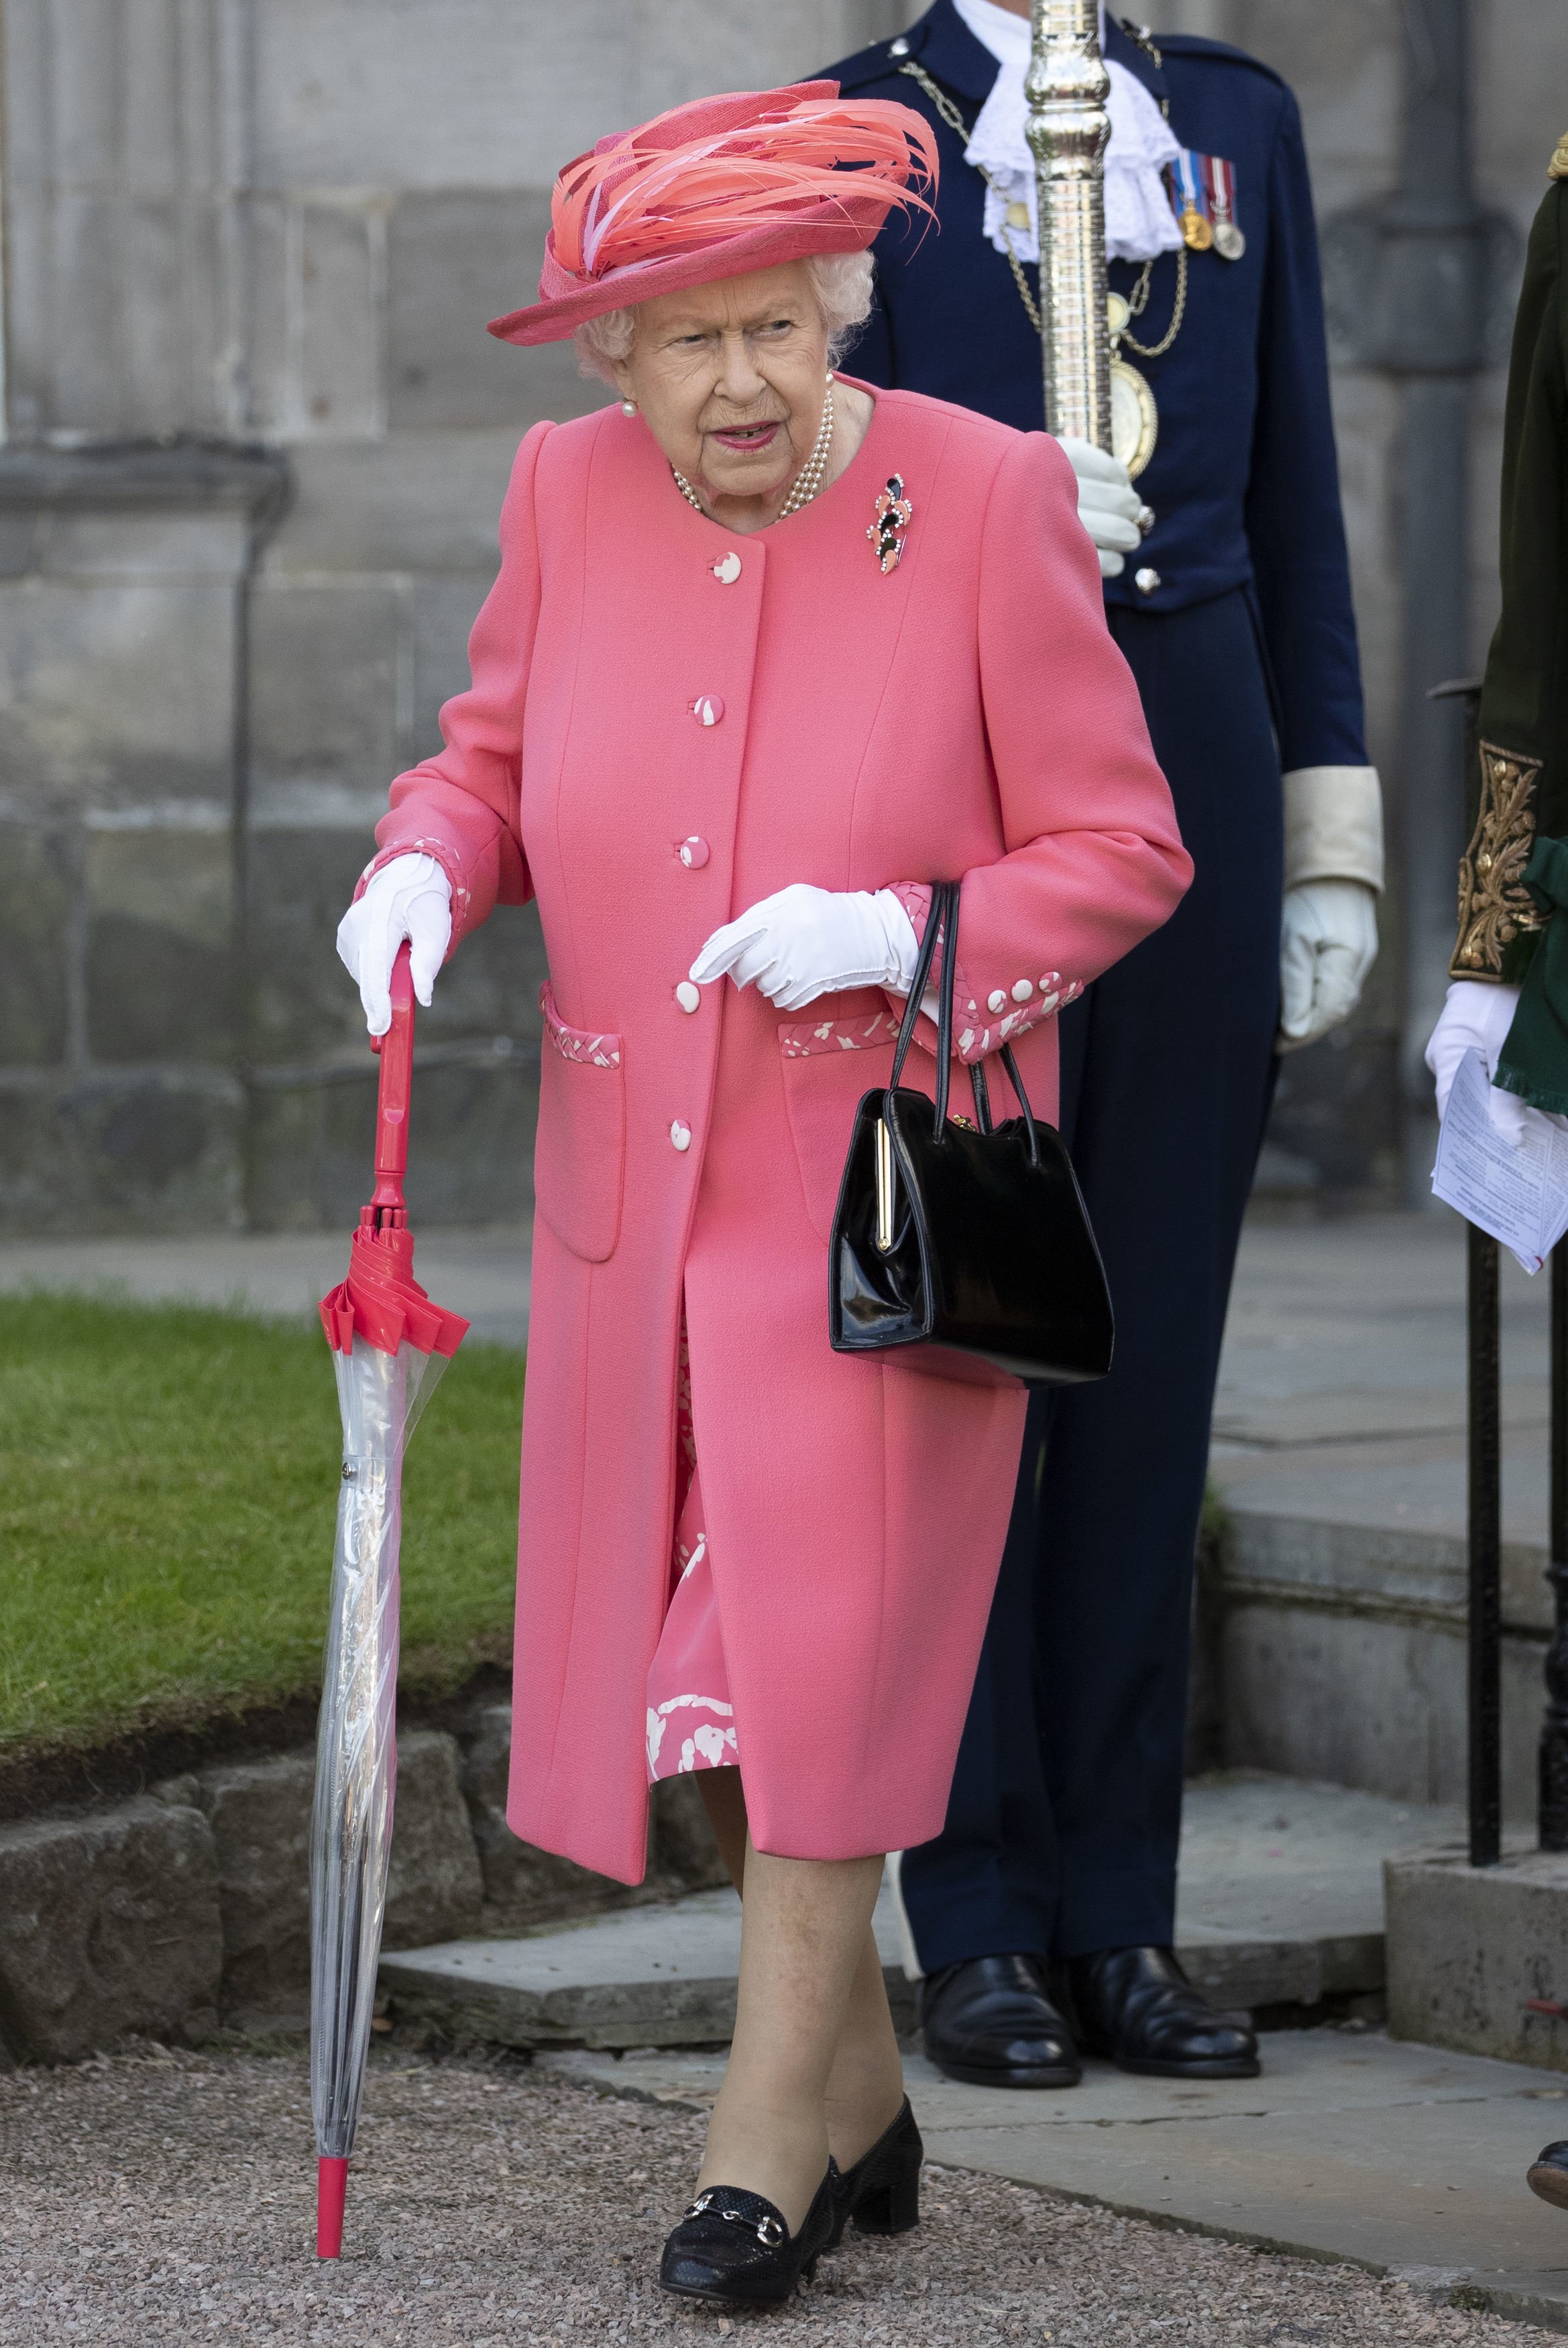 Queen Elizabeth attends a Garden Party at the Palace of Holyroodhouse in Scotland in July 2019 | Photo: Getty Images